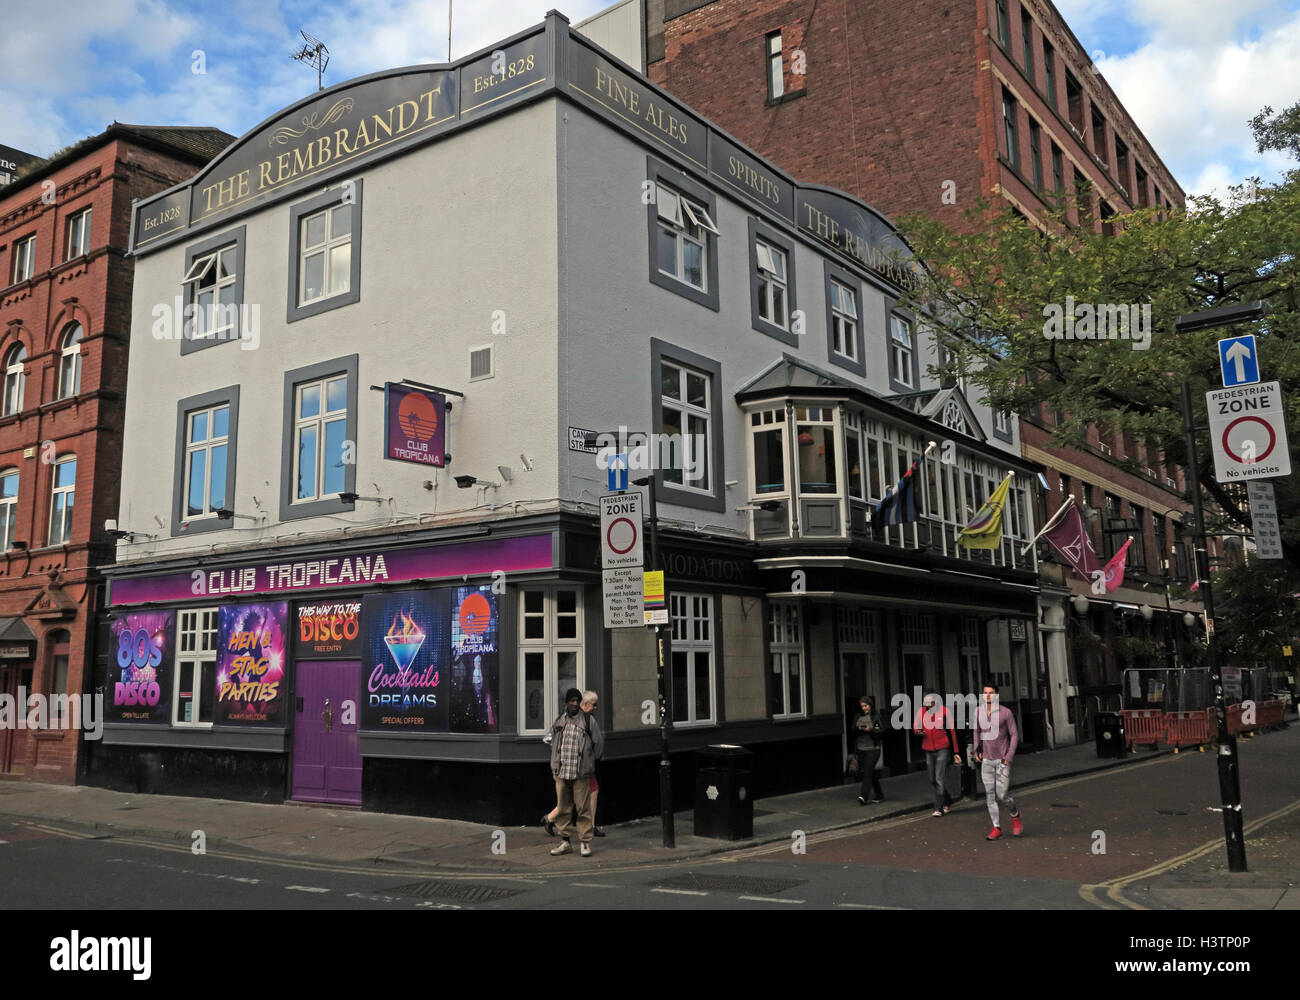 The Rembrandt pub,Canal St Gay Village,Manchester,England Stock Photo